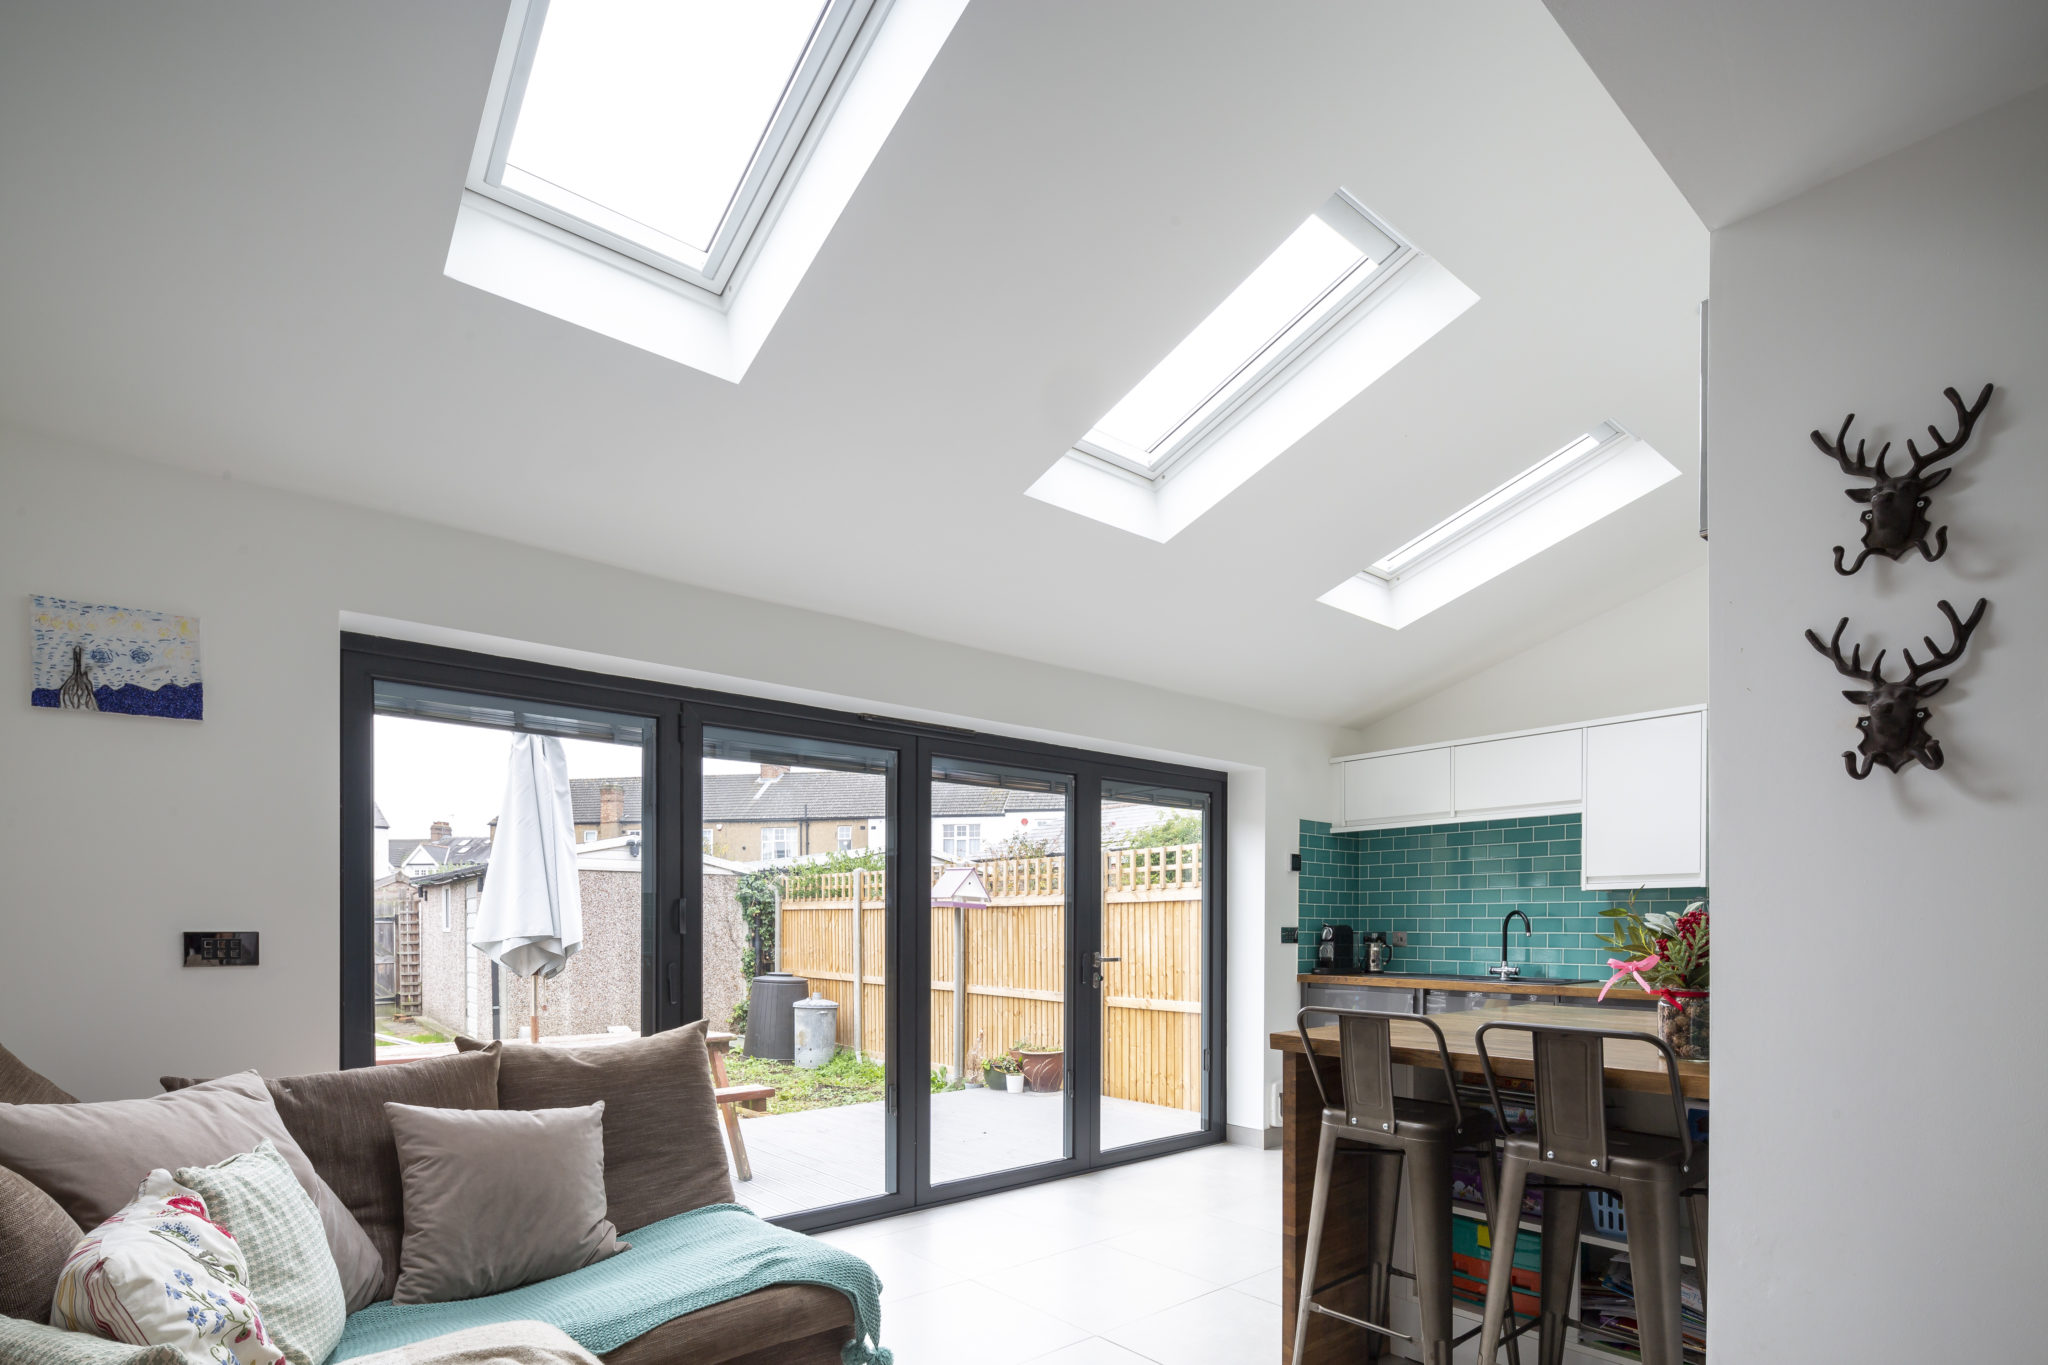 1930s house transformed by modern, light-filled kitchen extension @VELUXGBI